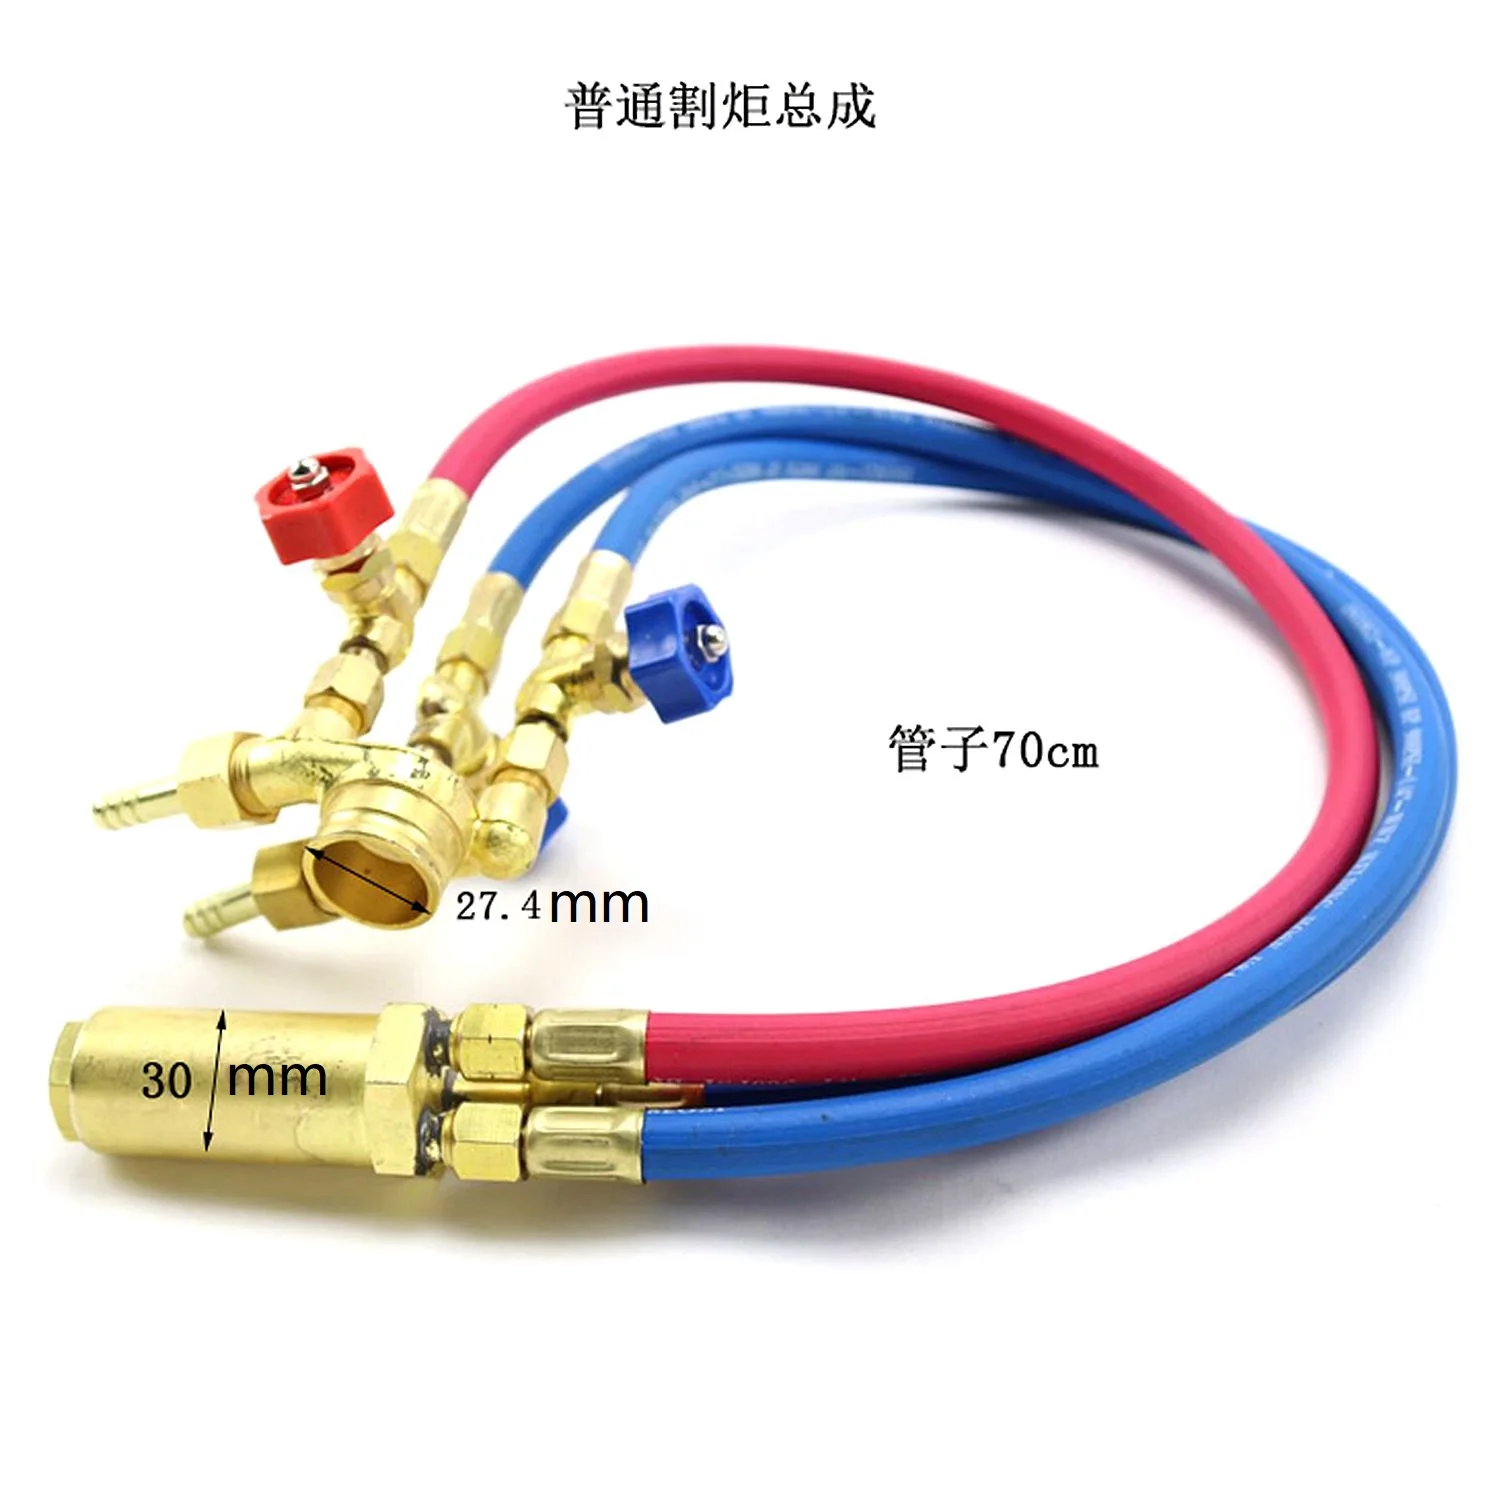 CG1-30 CG30 G02 G03 ANME Acetylene PNME Propane Flame Cutting Machine Gas Cutter Hose Torch Part Assembly